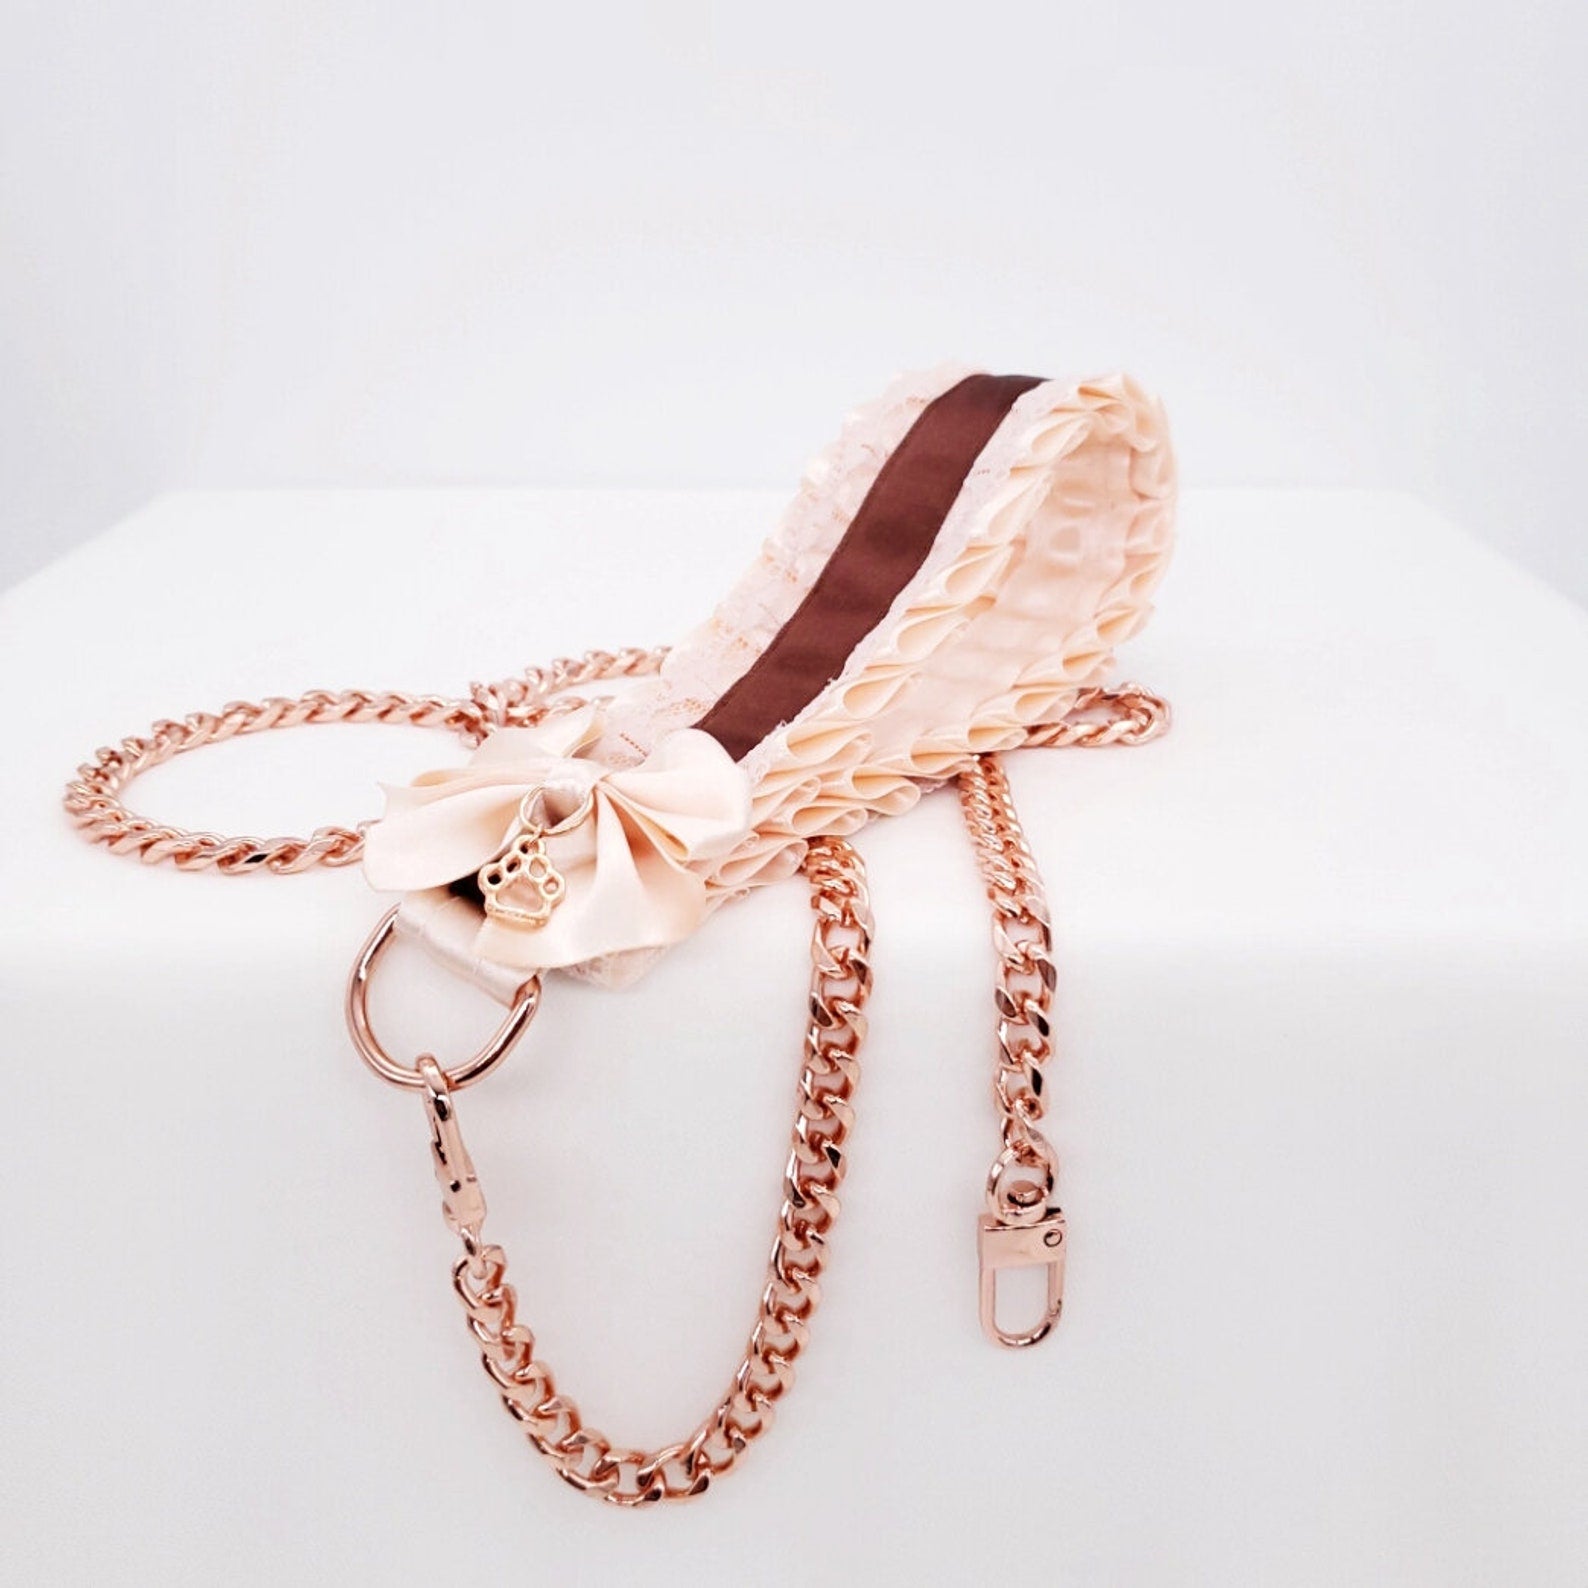 Cream and Chocolate Brown Puppy Pet Play Collar and Leash Set - Rose Gold